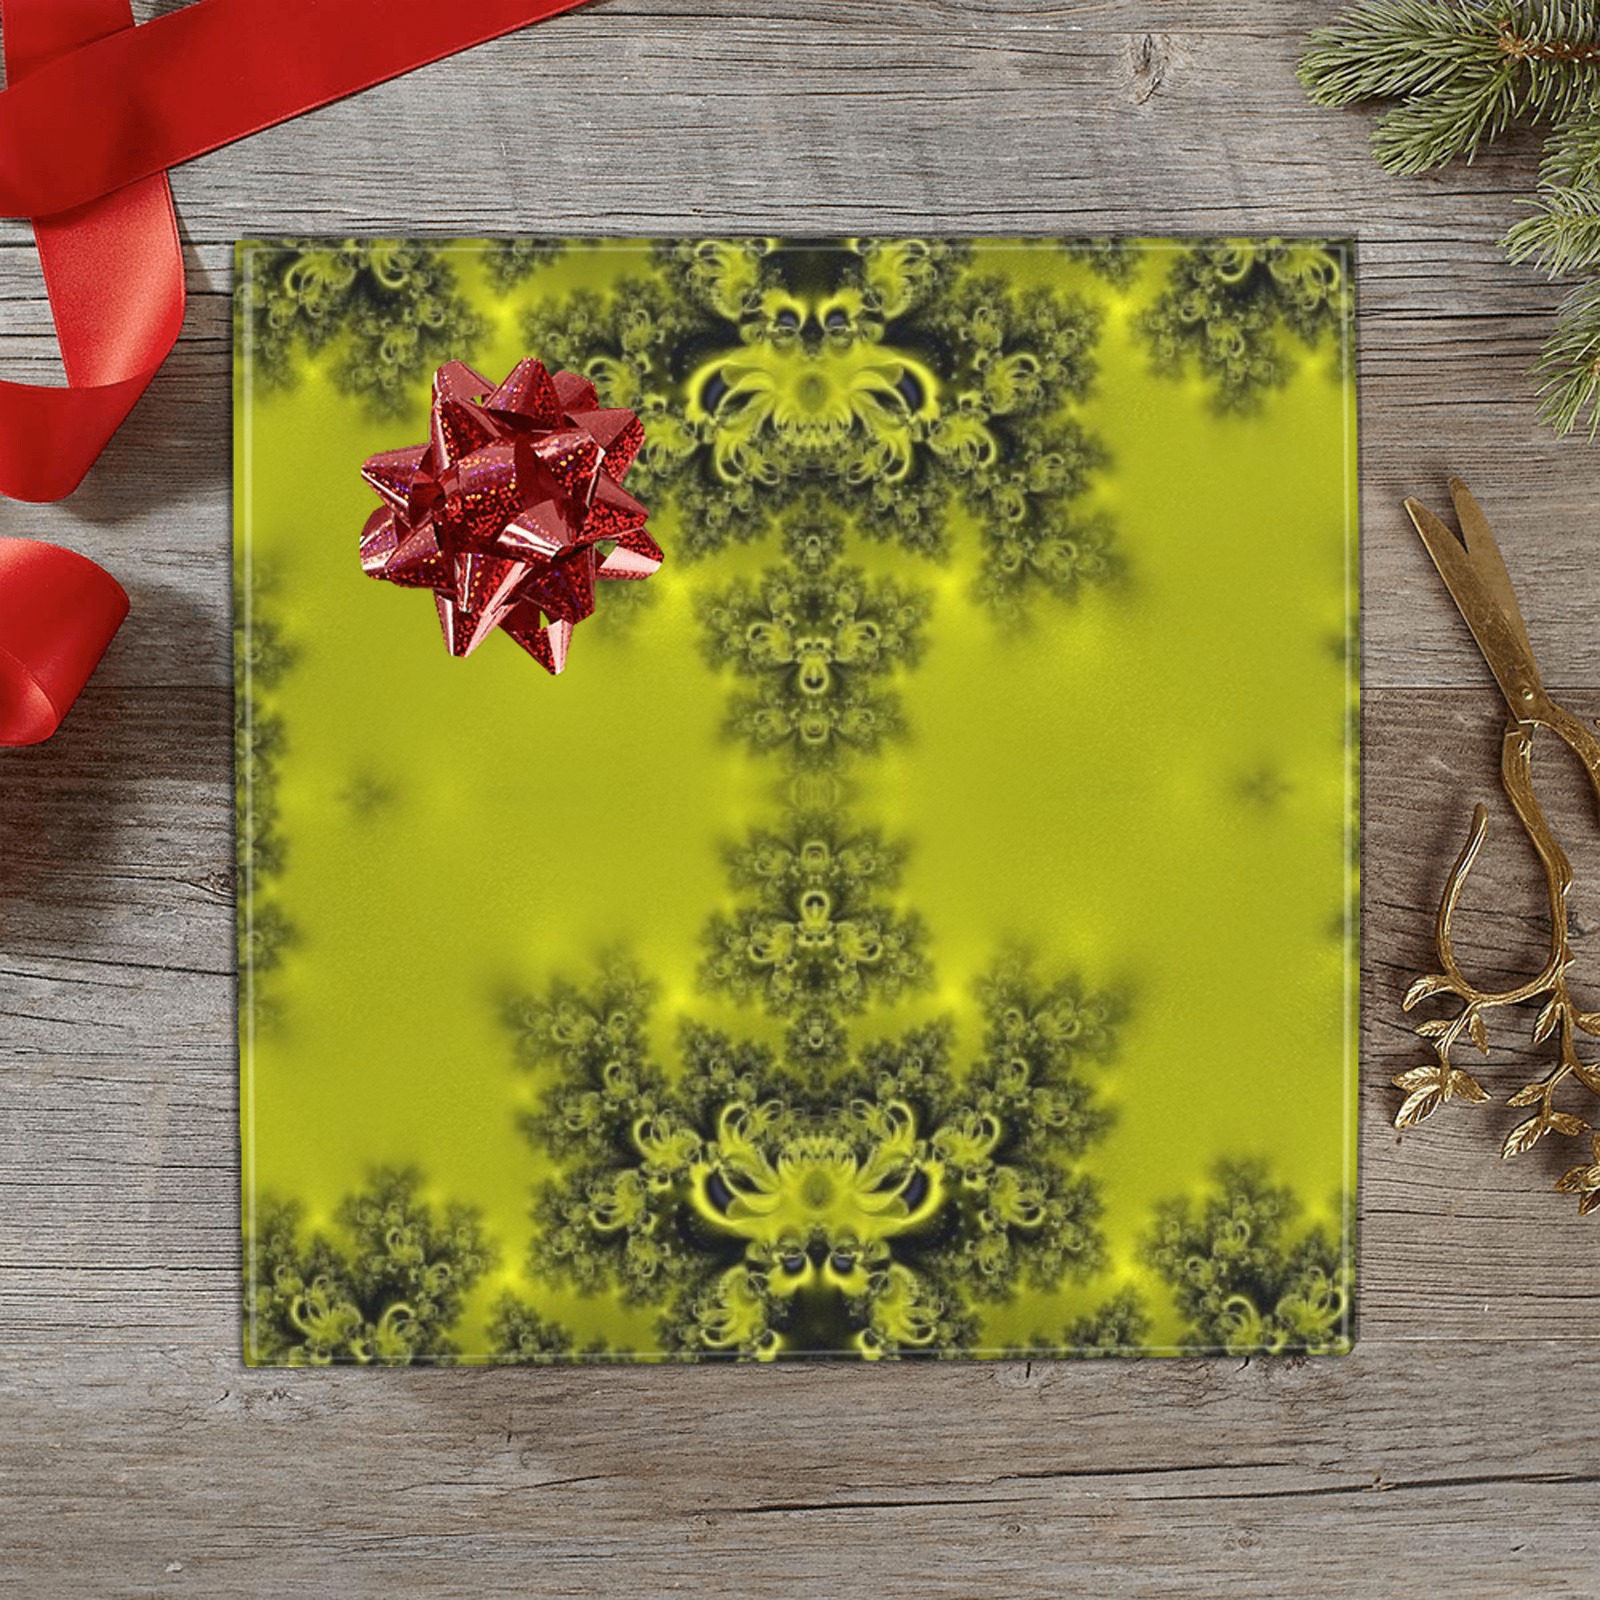 Summer Sunflowers Frost Fractal Gift Wrapping Paper 58"x 23" (2 Rolls)